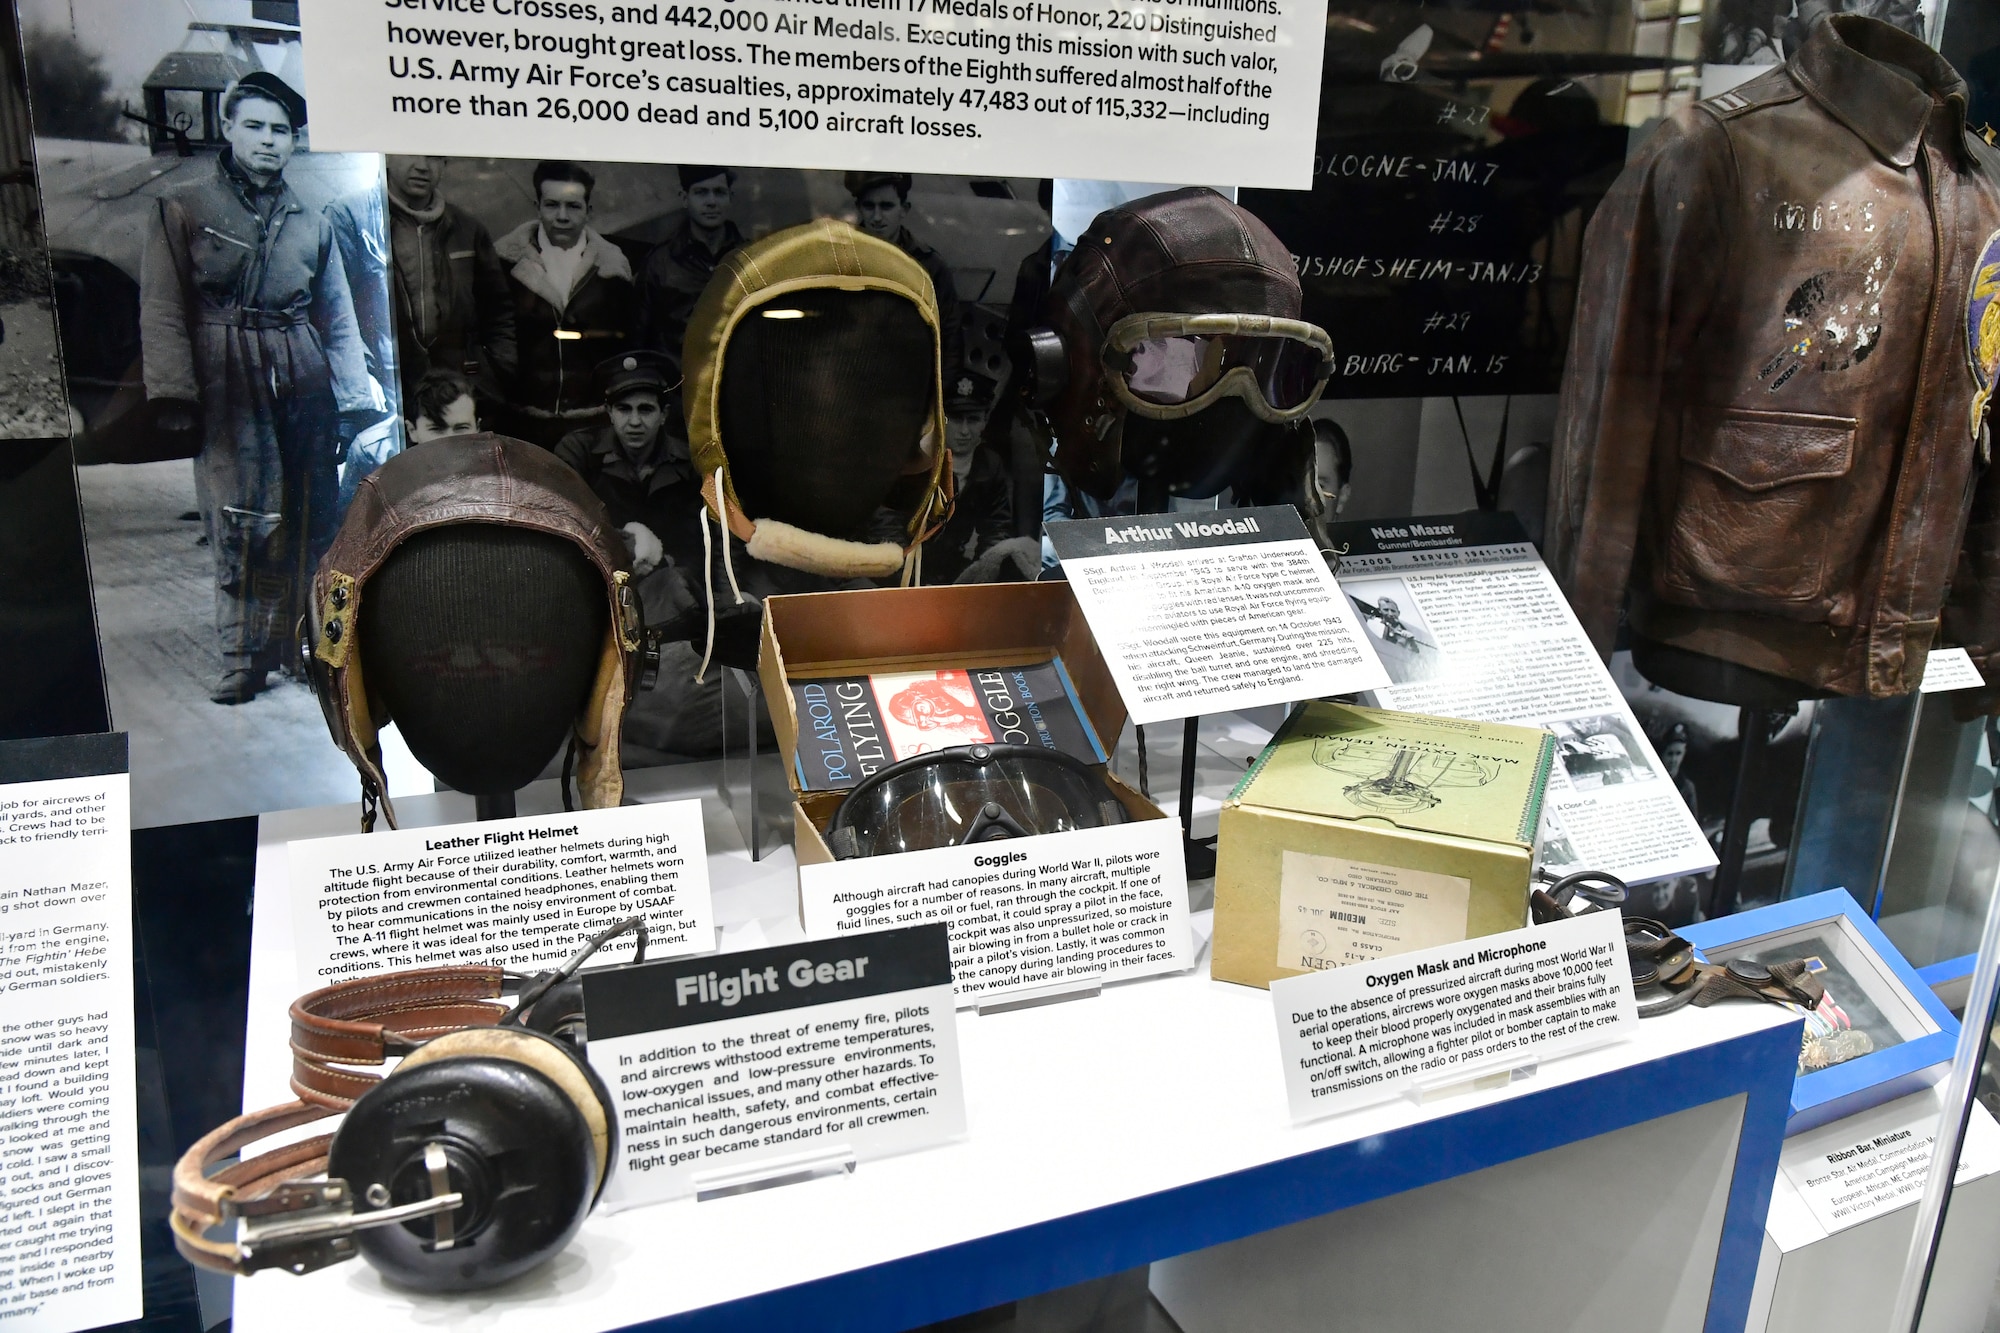 Flight crew gear and equipment displayed in a new 8th Air Force exhibit, part of the Hill Aerospace Museums extensive and informative display collection at Hill Air Force Base, Utah. These artifacts help to tell the story of individual Airman who served in Europe with the 8th Air Force, during WWII.